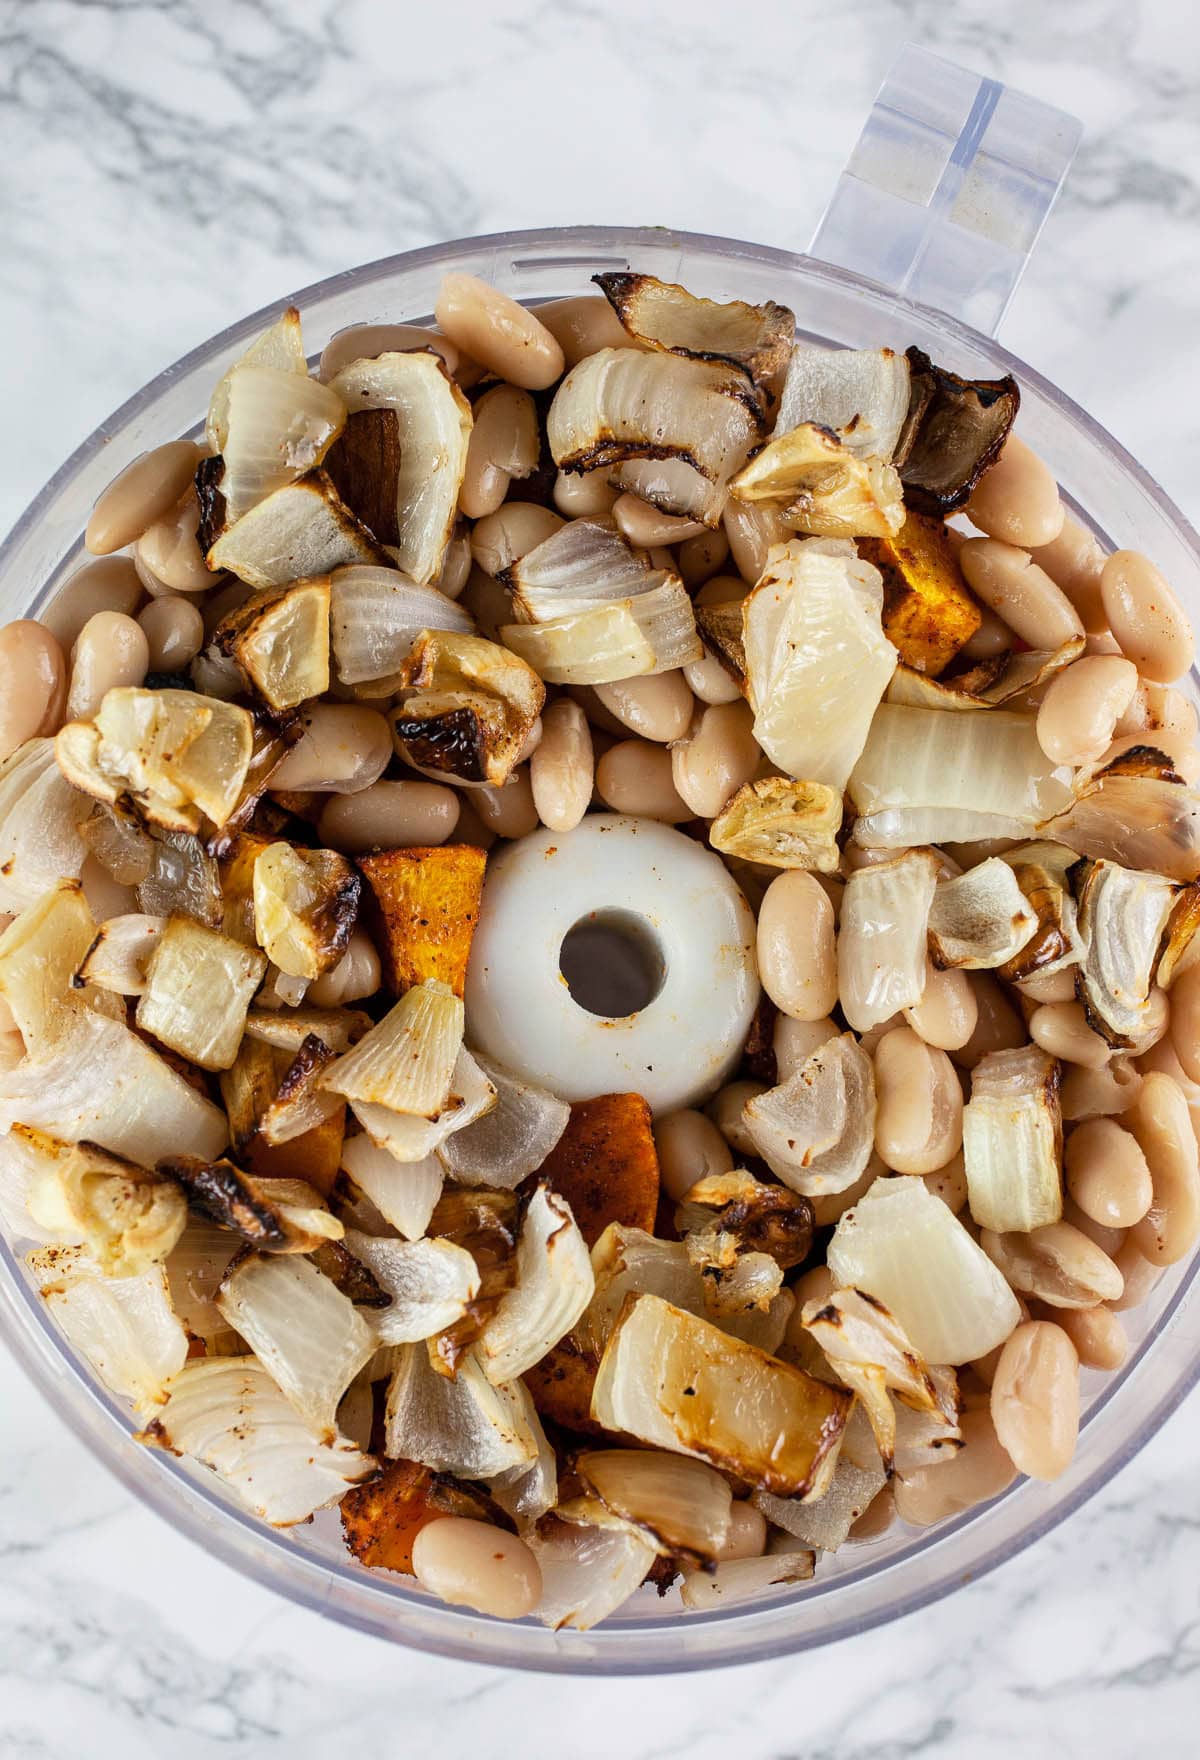 Roasted onions, garlic, squash, and white beans in food processor.